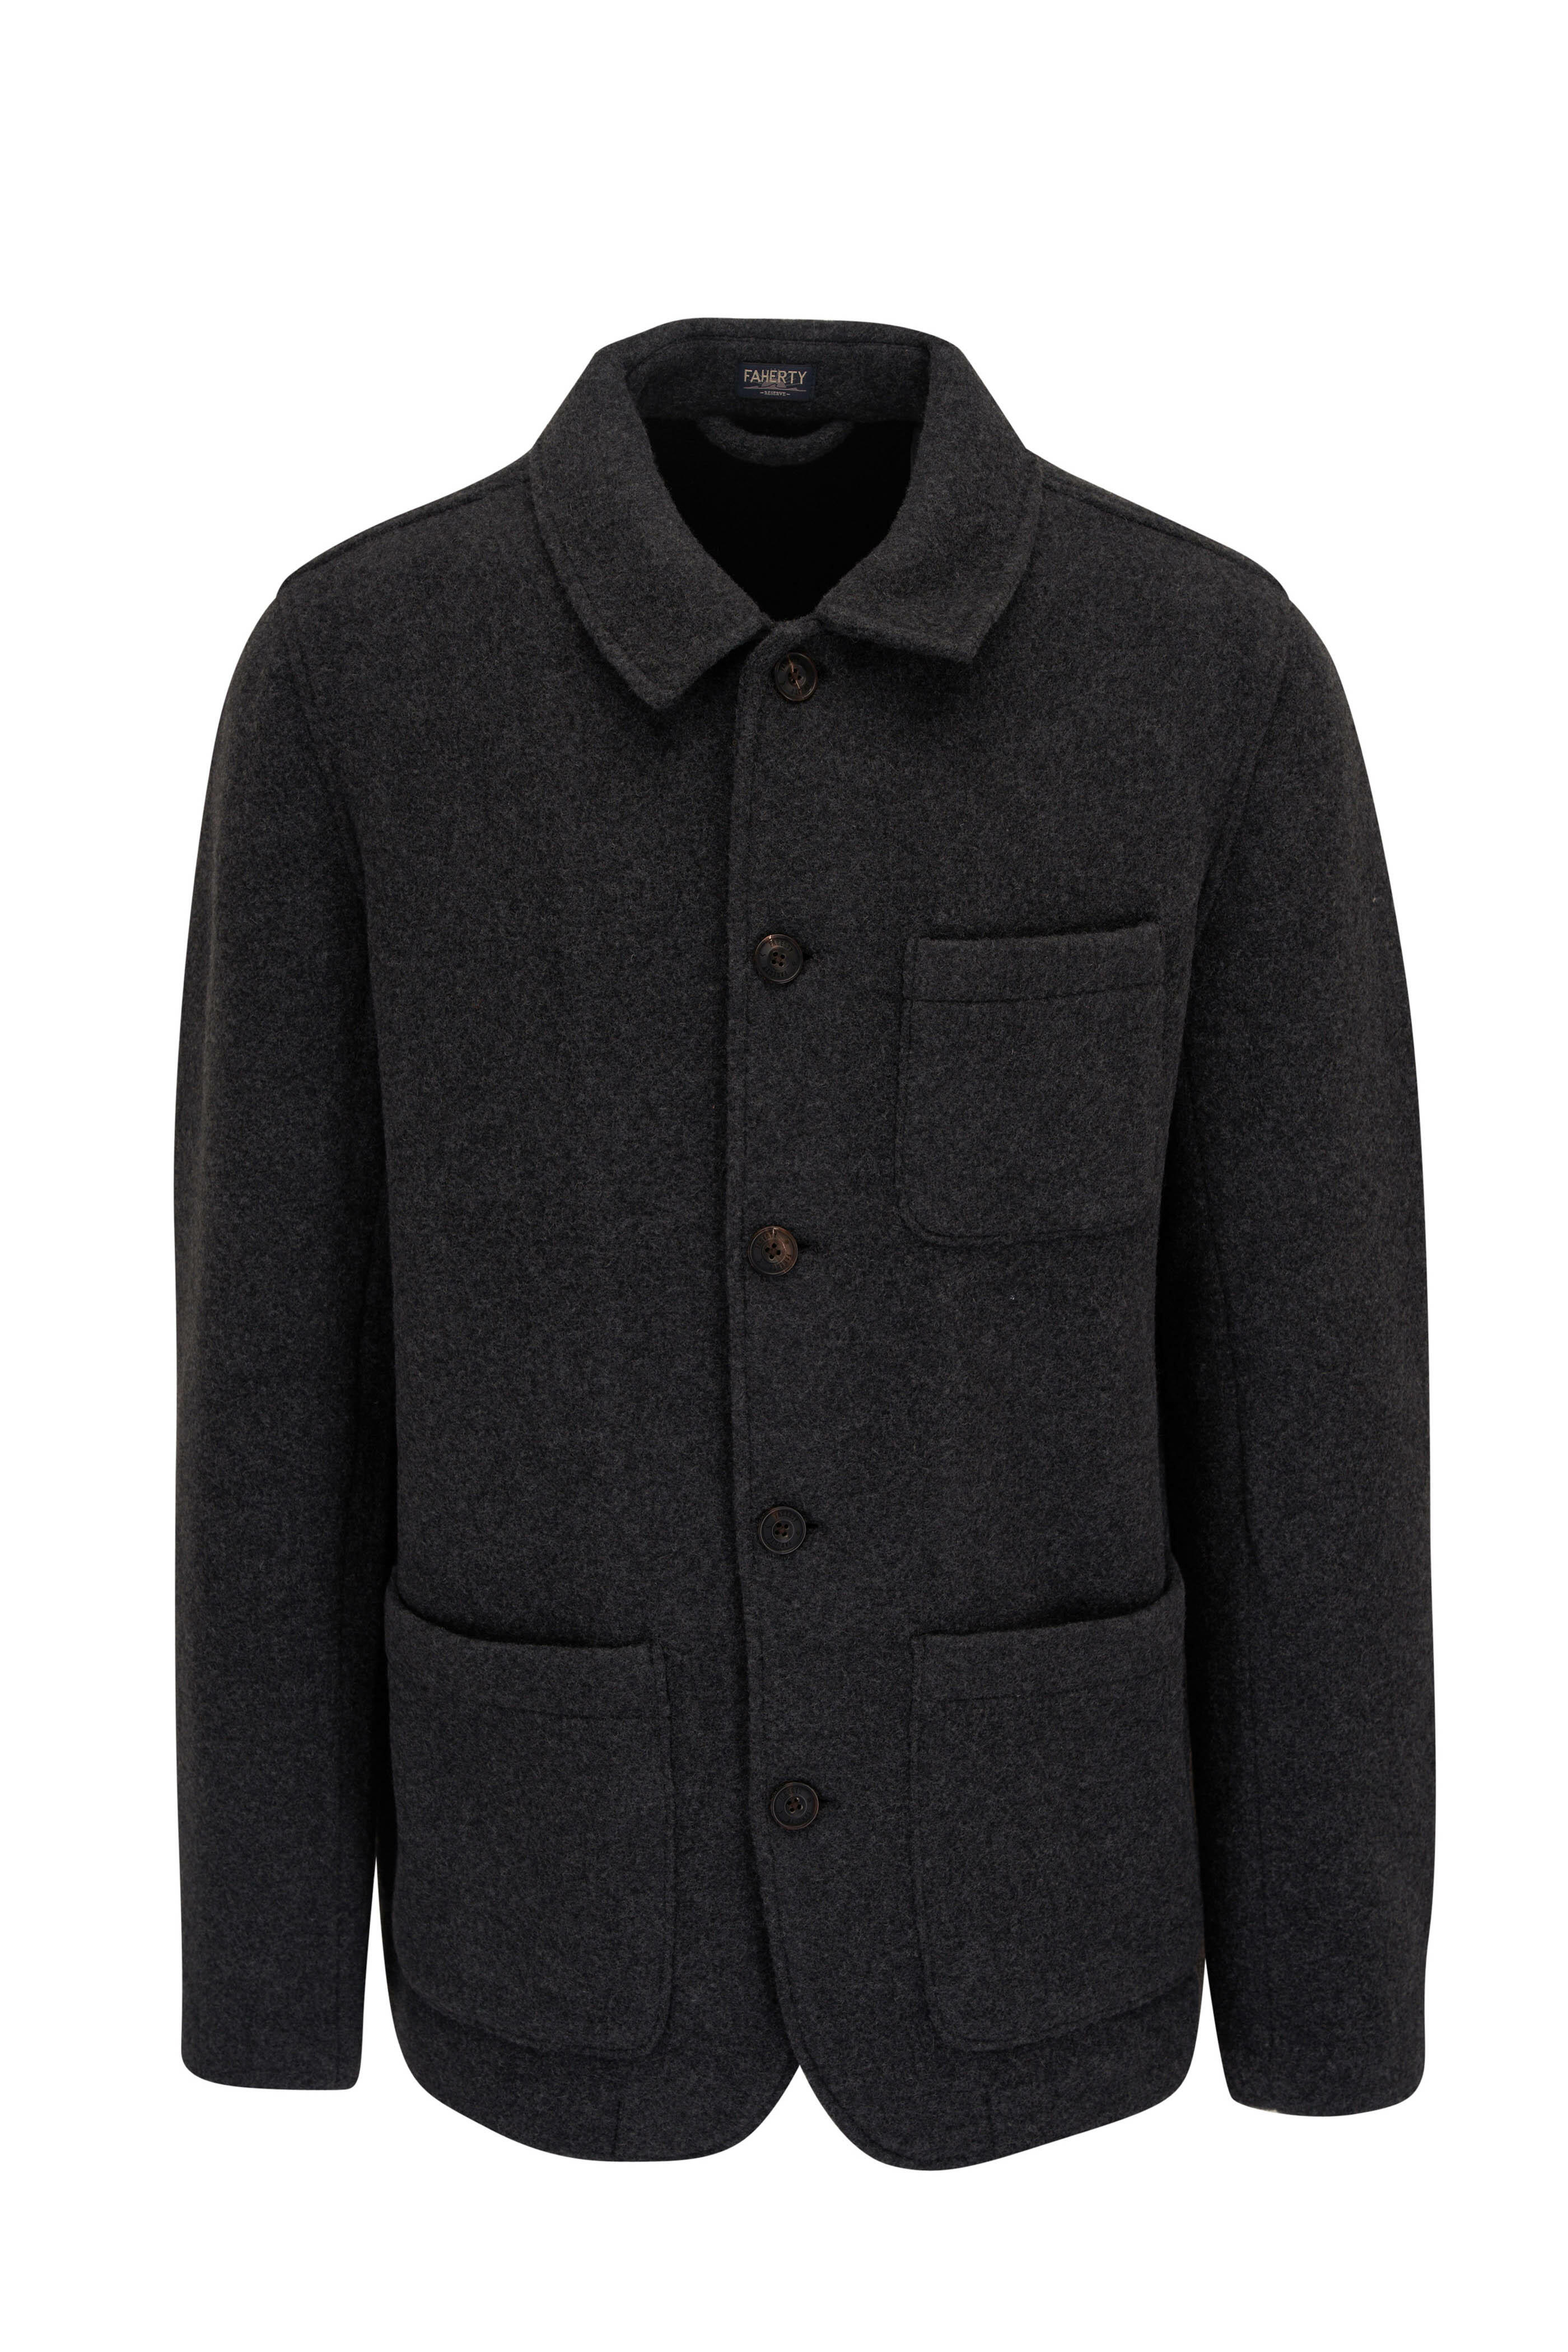 Faherty Brand - Charcoal Gray Wool Blend Chore Jacket